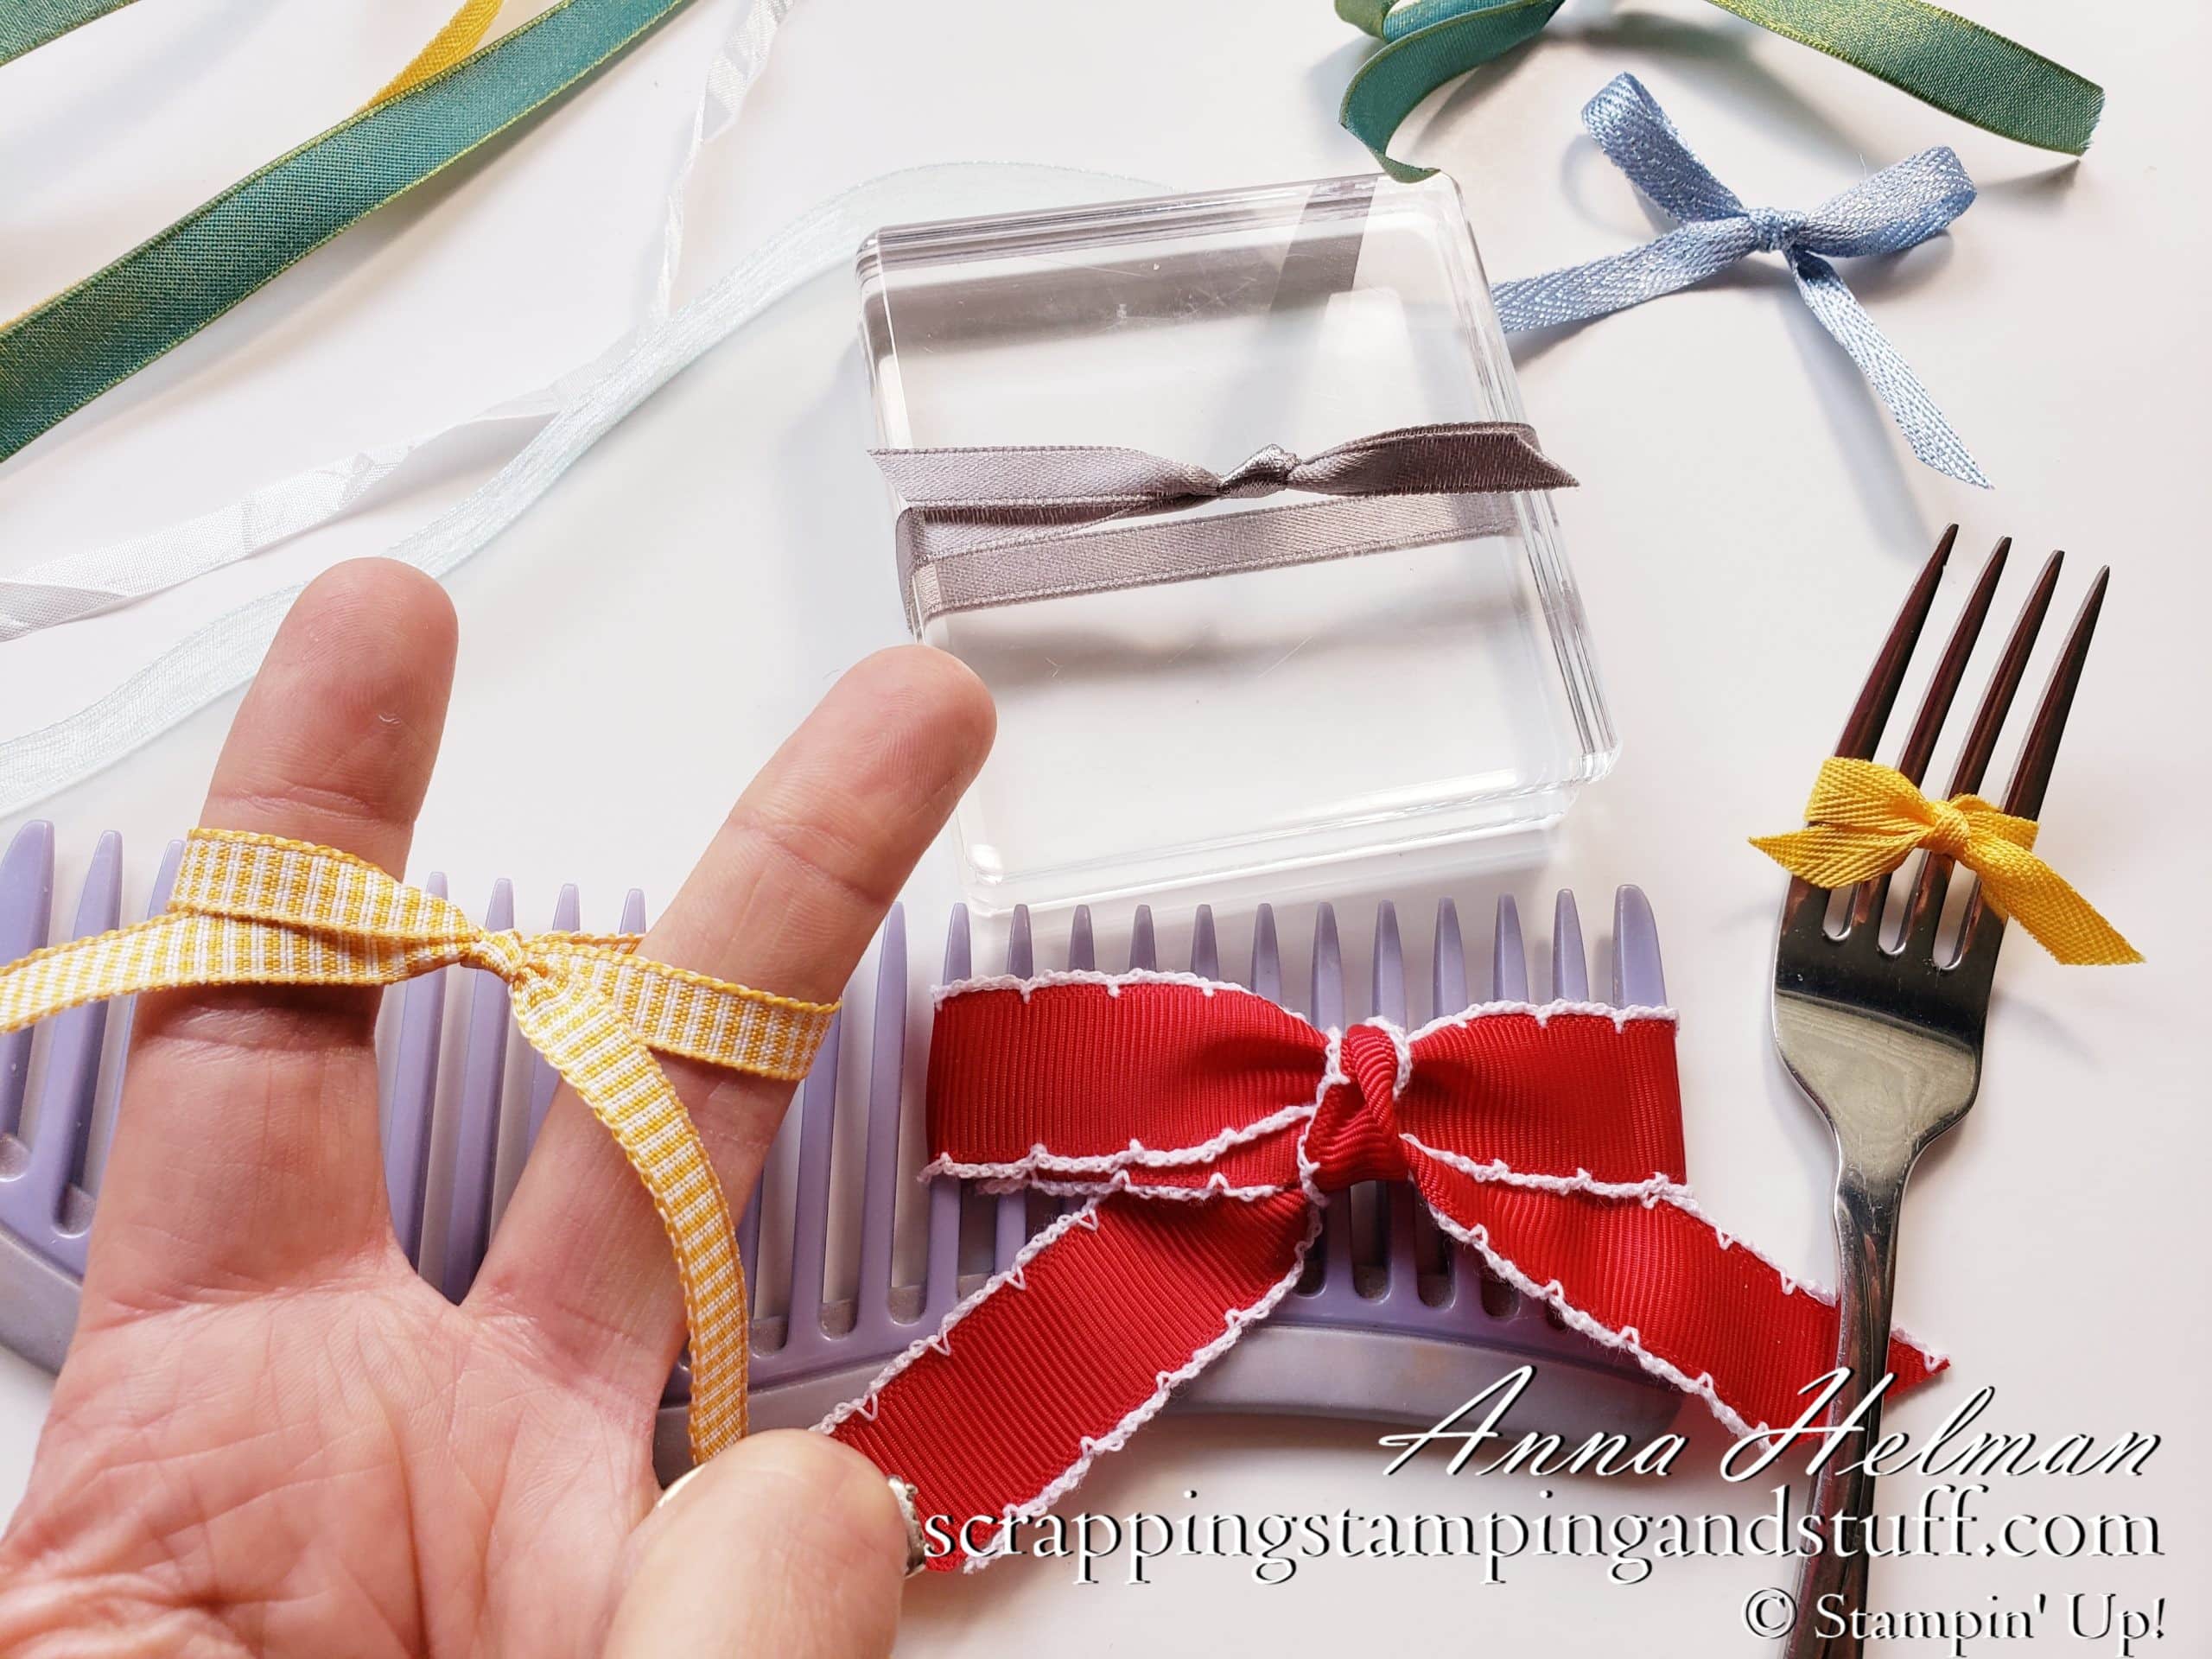 How To Tie A Bow For Cards, Crafts or Gifts – 10 Tips For Tying A Perfect Bow Every Time